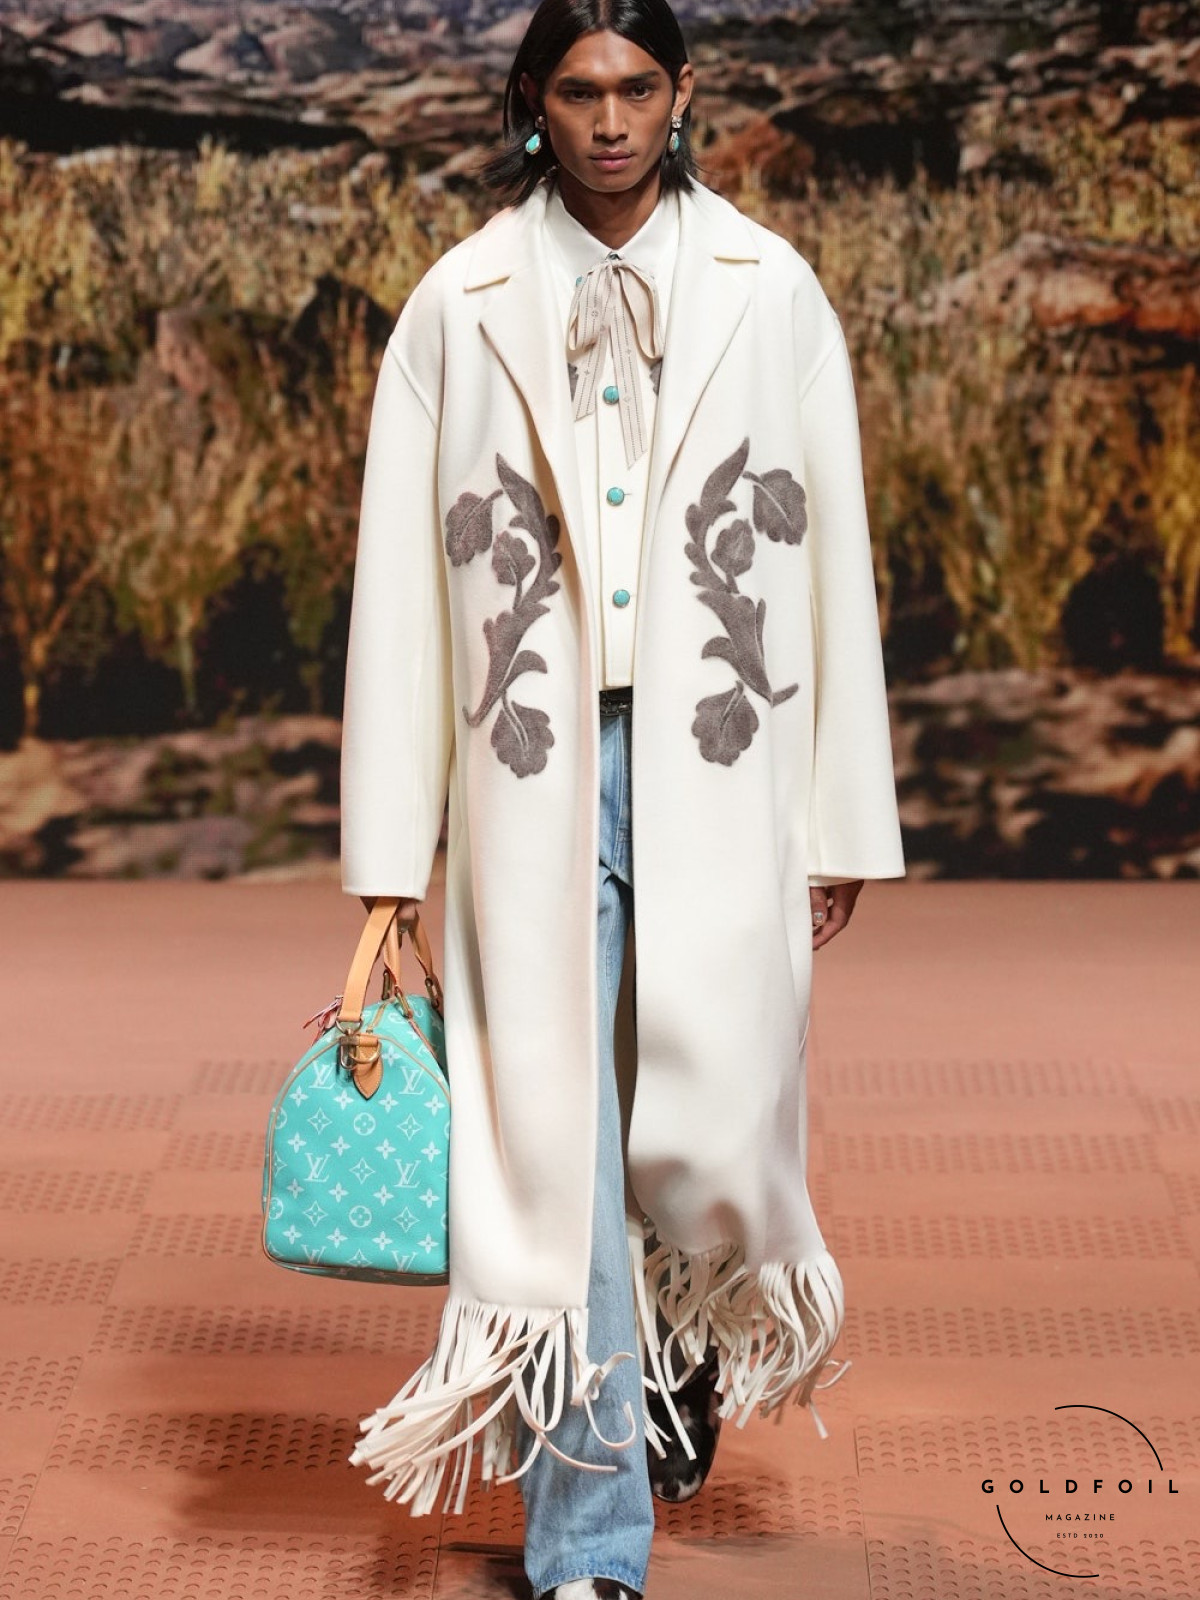 A model walks the Louis Vuitton runway show wearing a long white coat with leaves embroidery with a fringe, straight denim jeans, and a pussy bow tie shirt